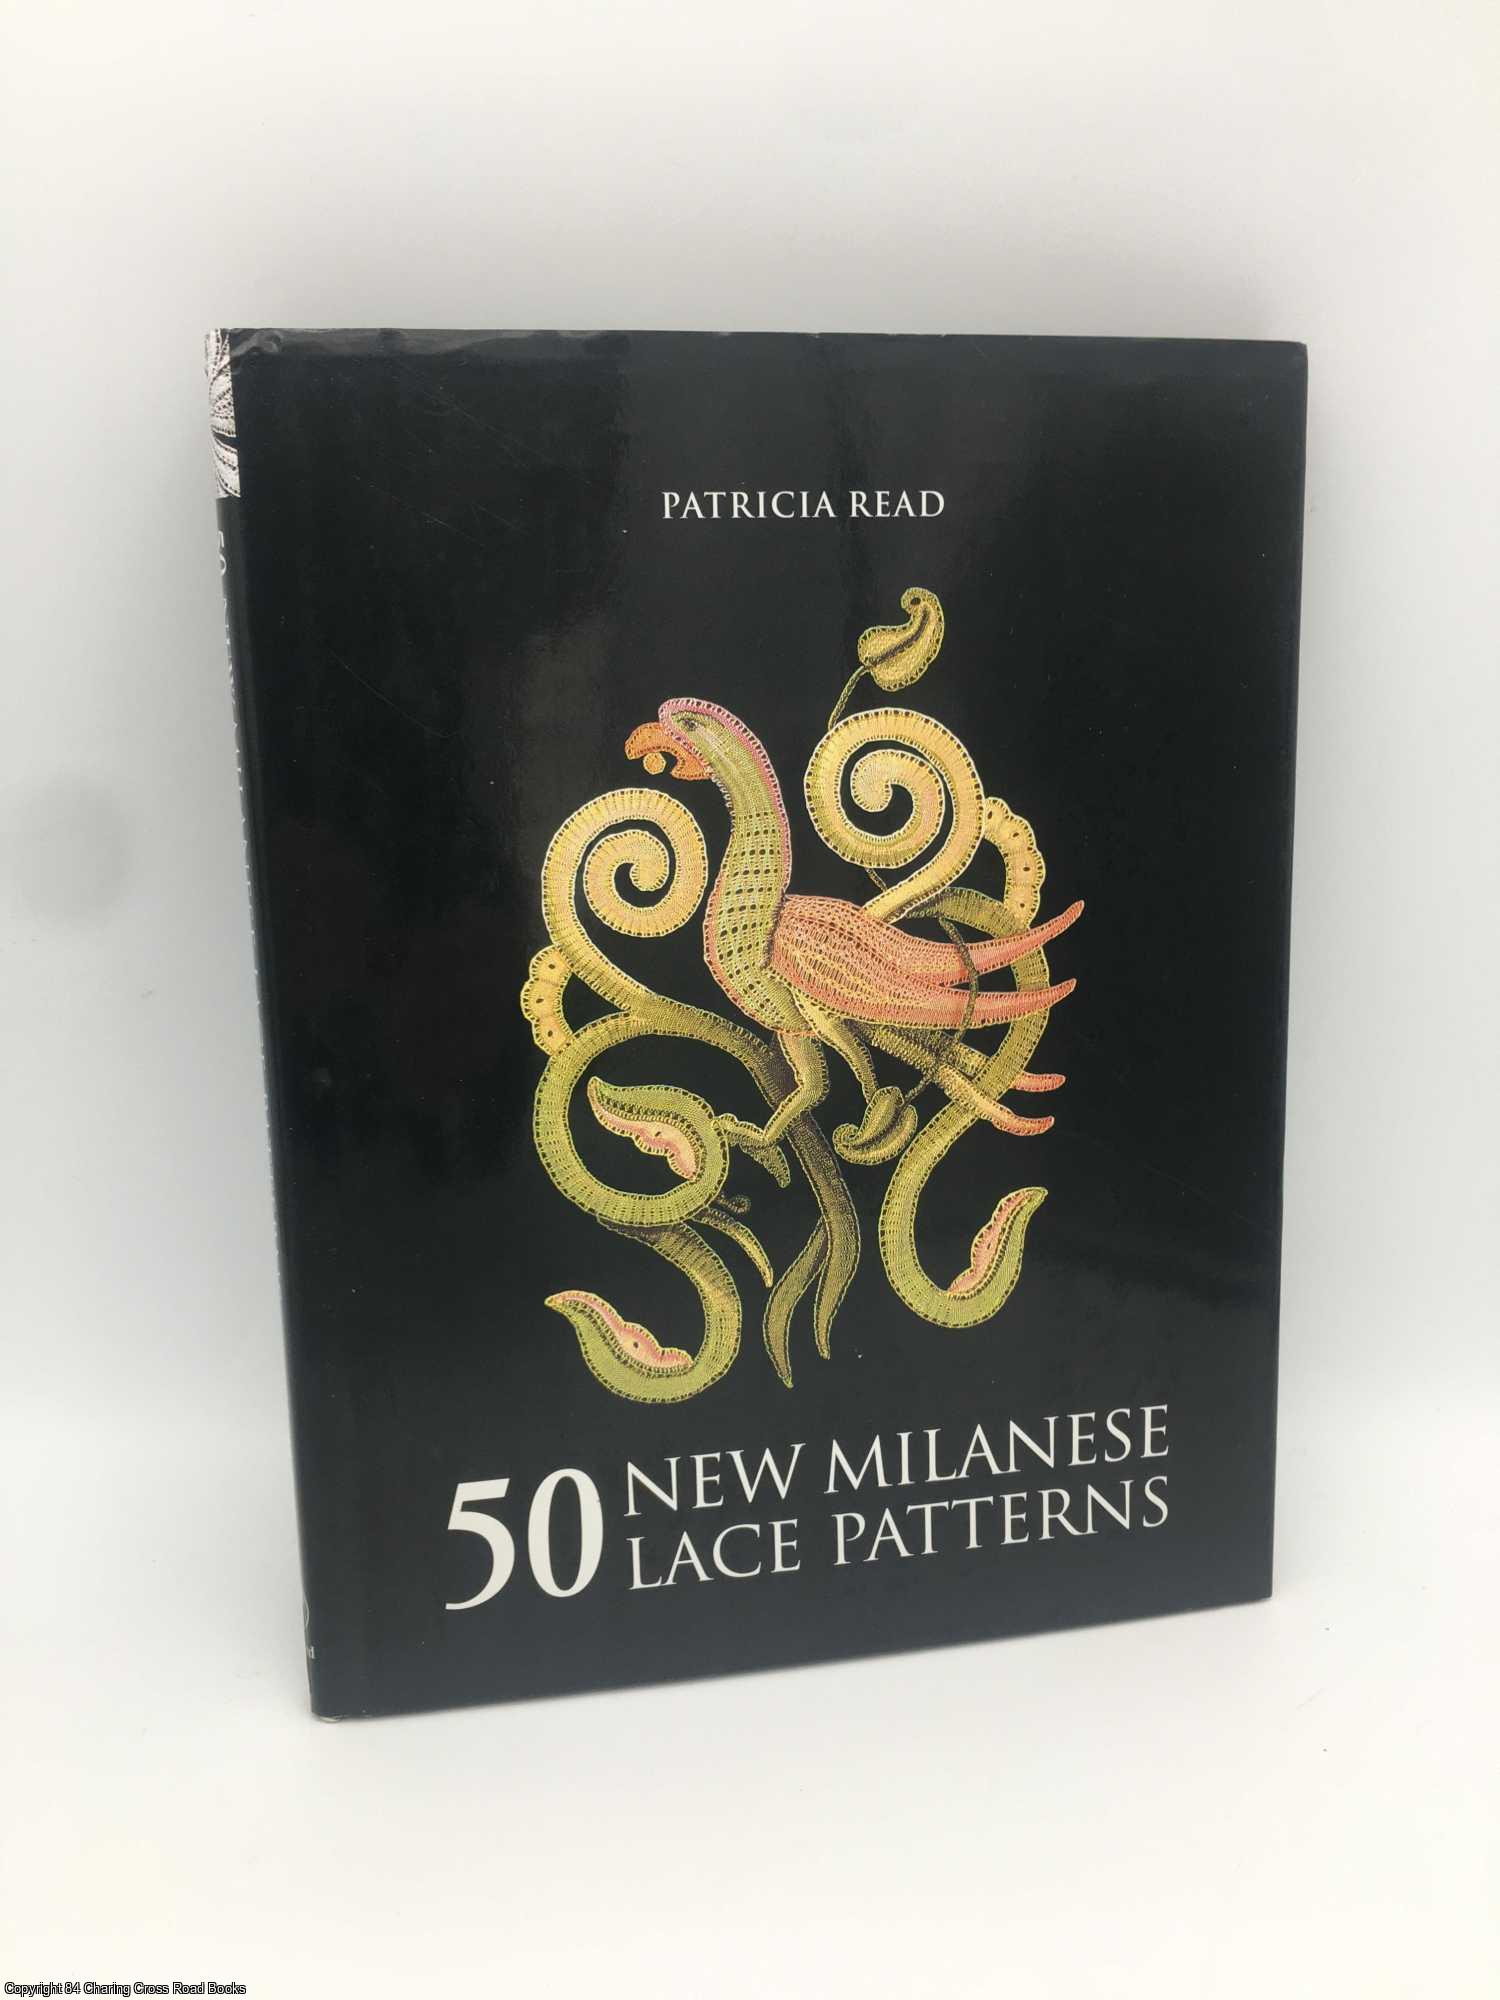 Read, Patricia - 50 New Milanese Lace Patterns